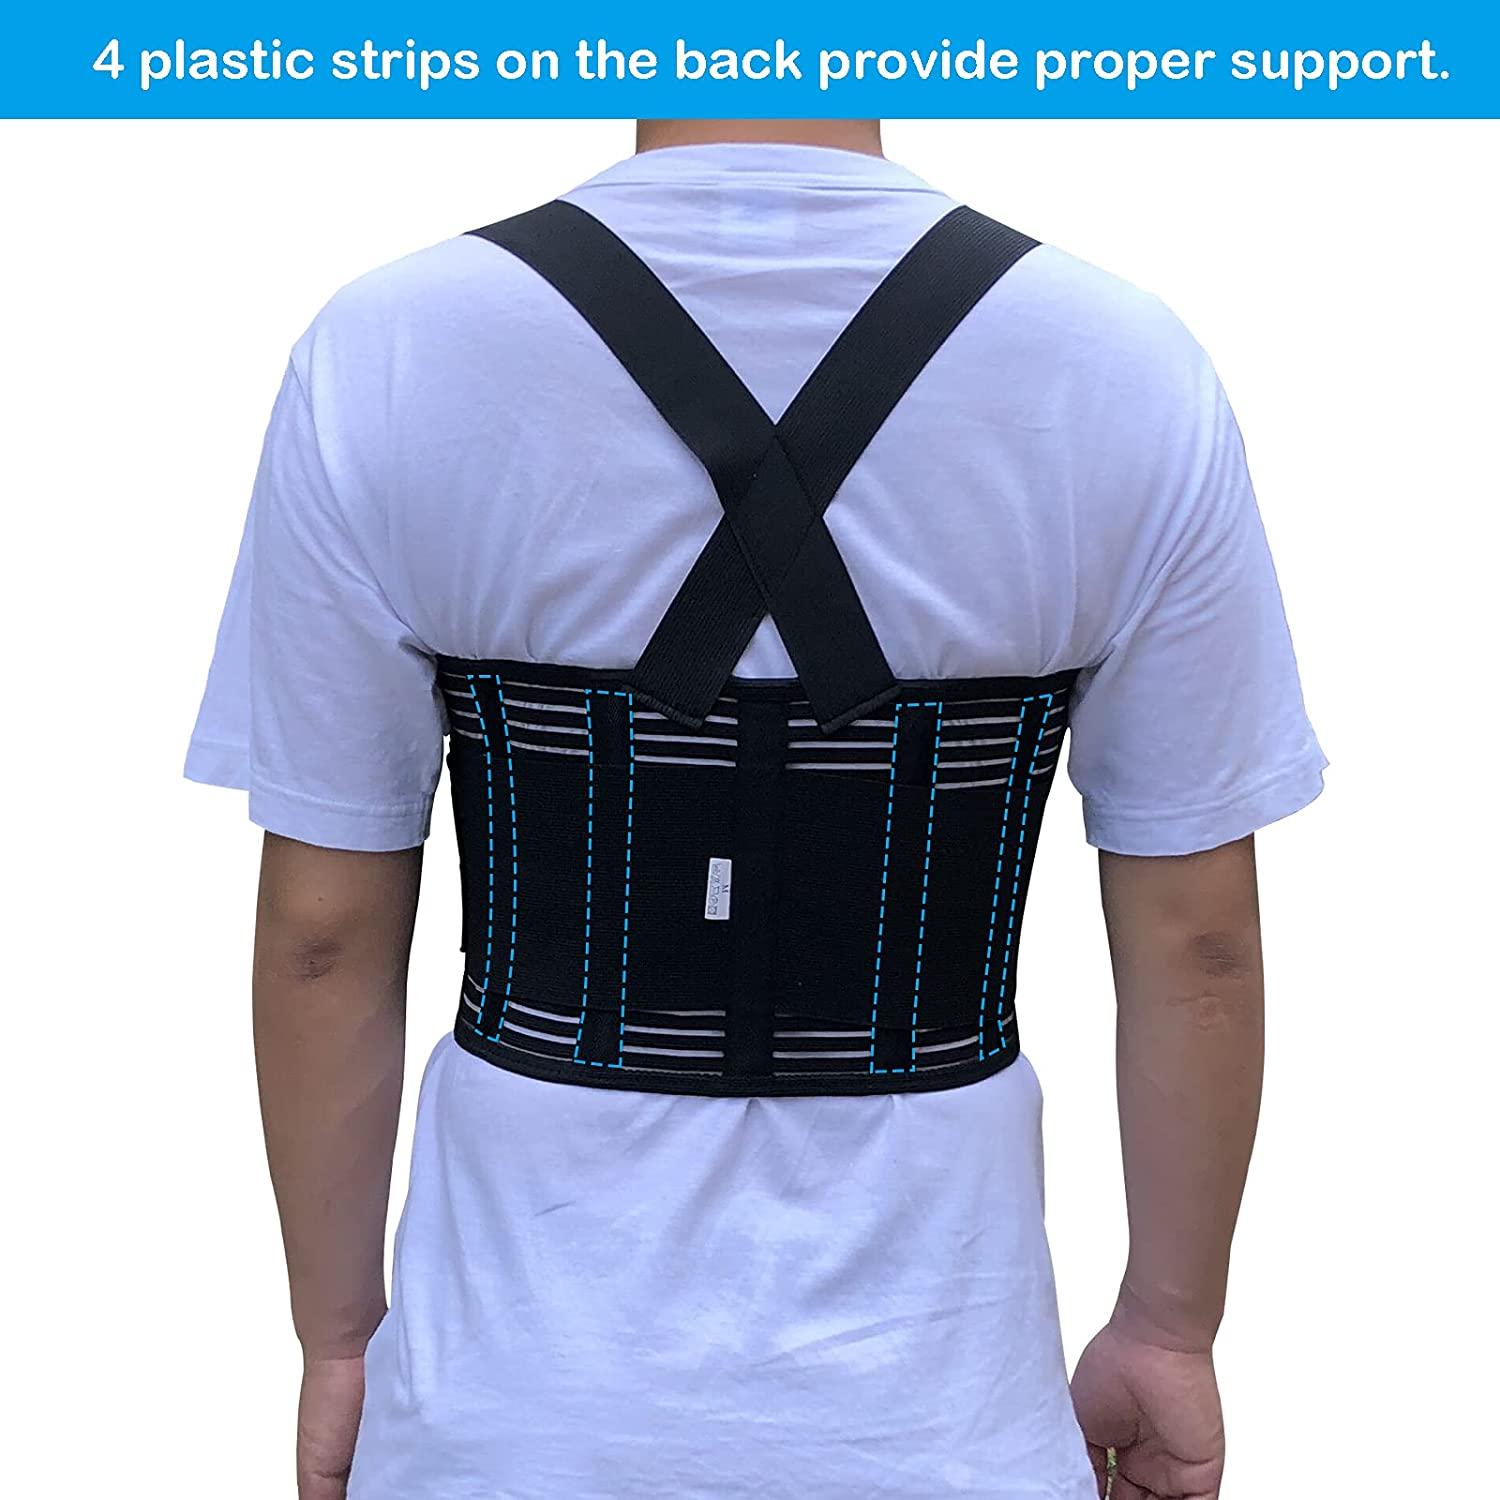 Rib Brace Chest Binder Belt for Men and Women, Breathable Rib Support Wrap  for Cracked, Fractured or Dislocated Ribs Protection, Compression Rib Cage  Brace for Bruised or Broken Ribs (XX-Large)